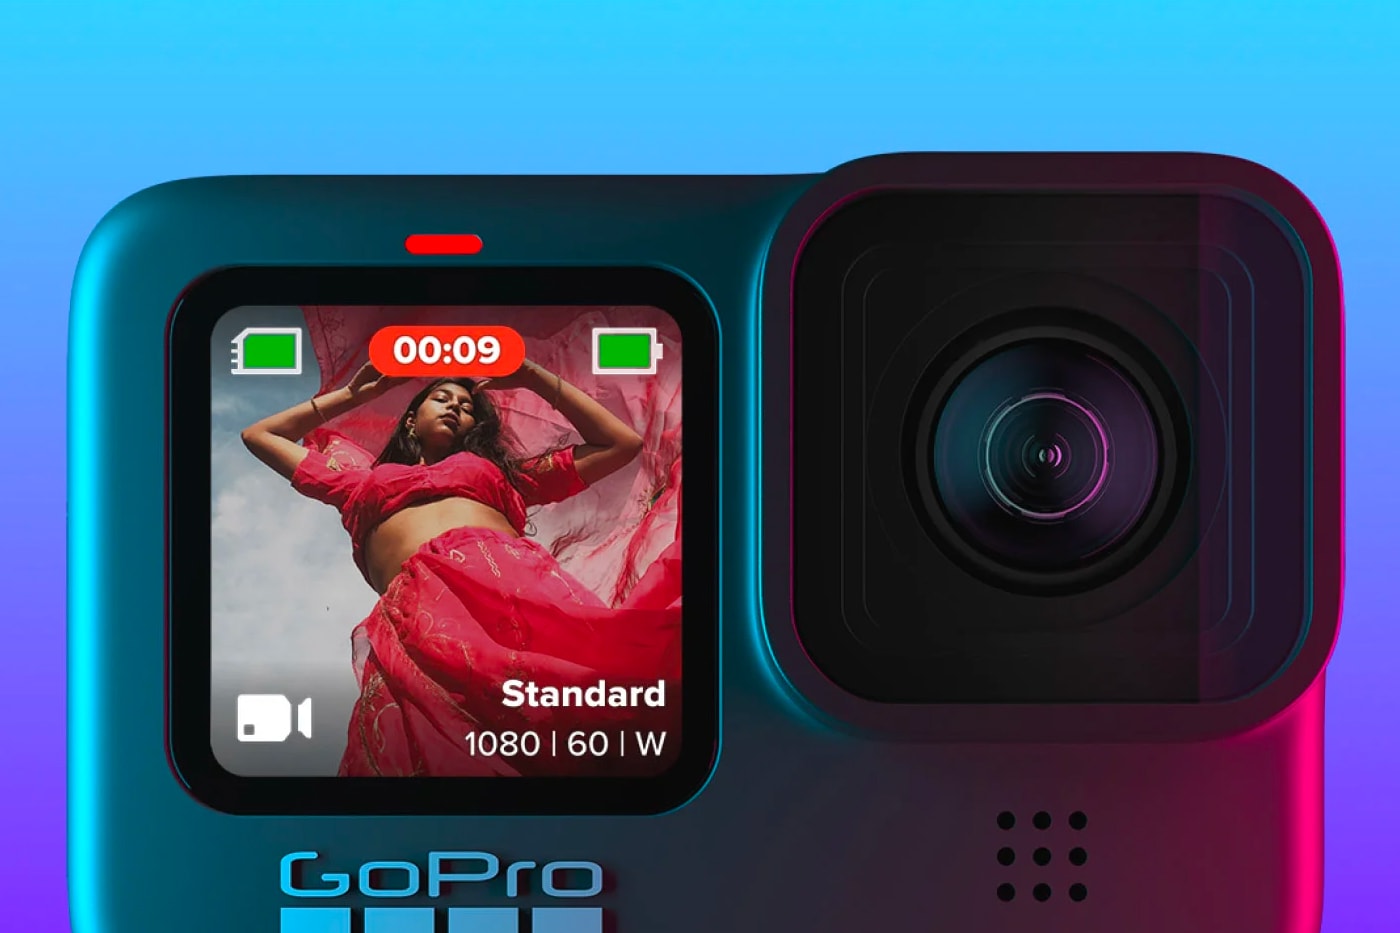 GoPro launches Hero 9 Black action camera with 5K video recording